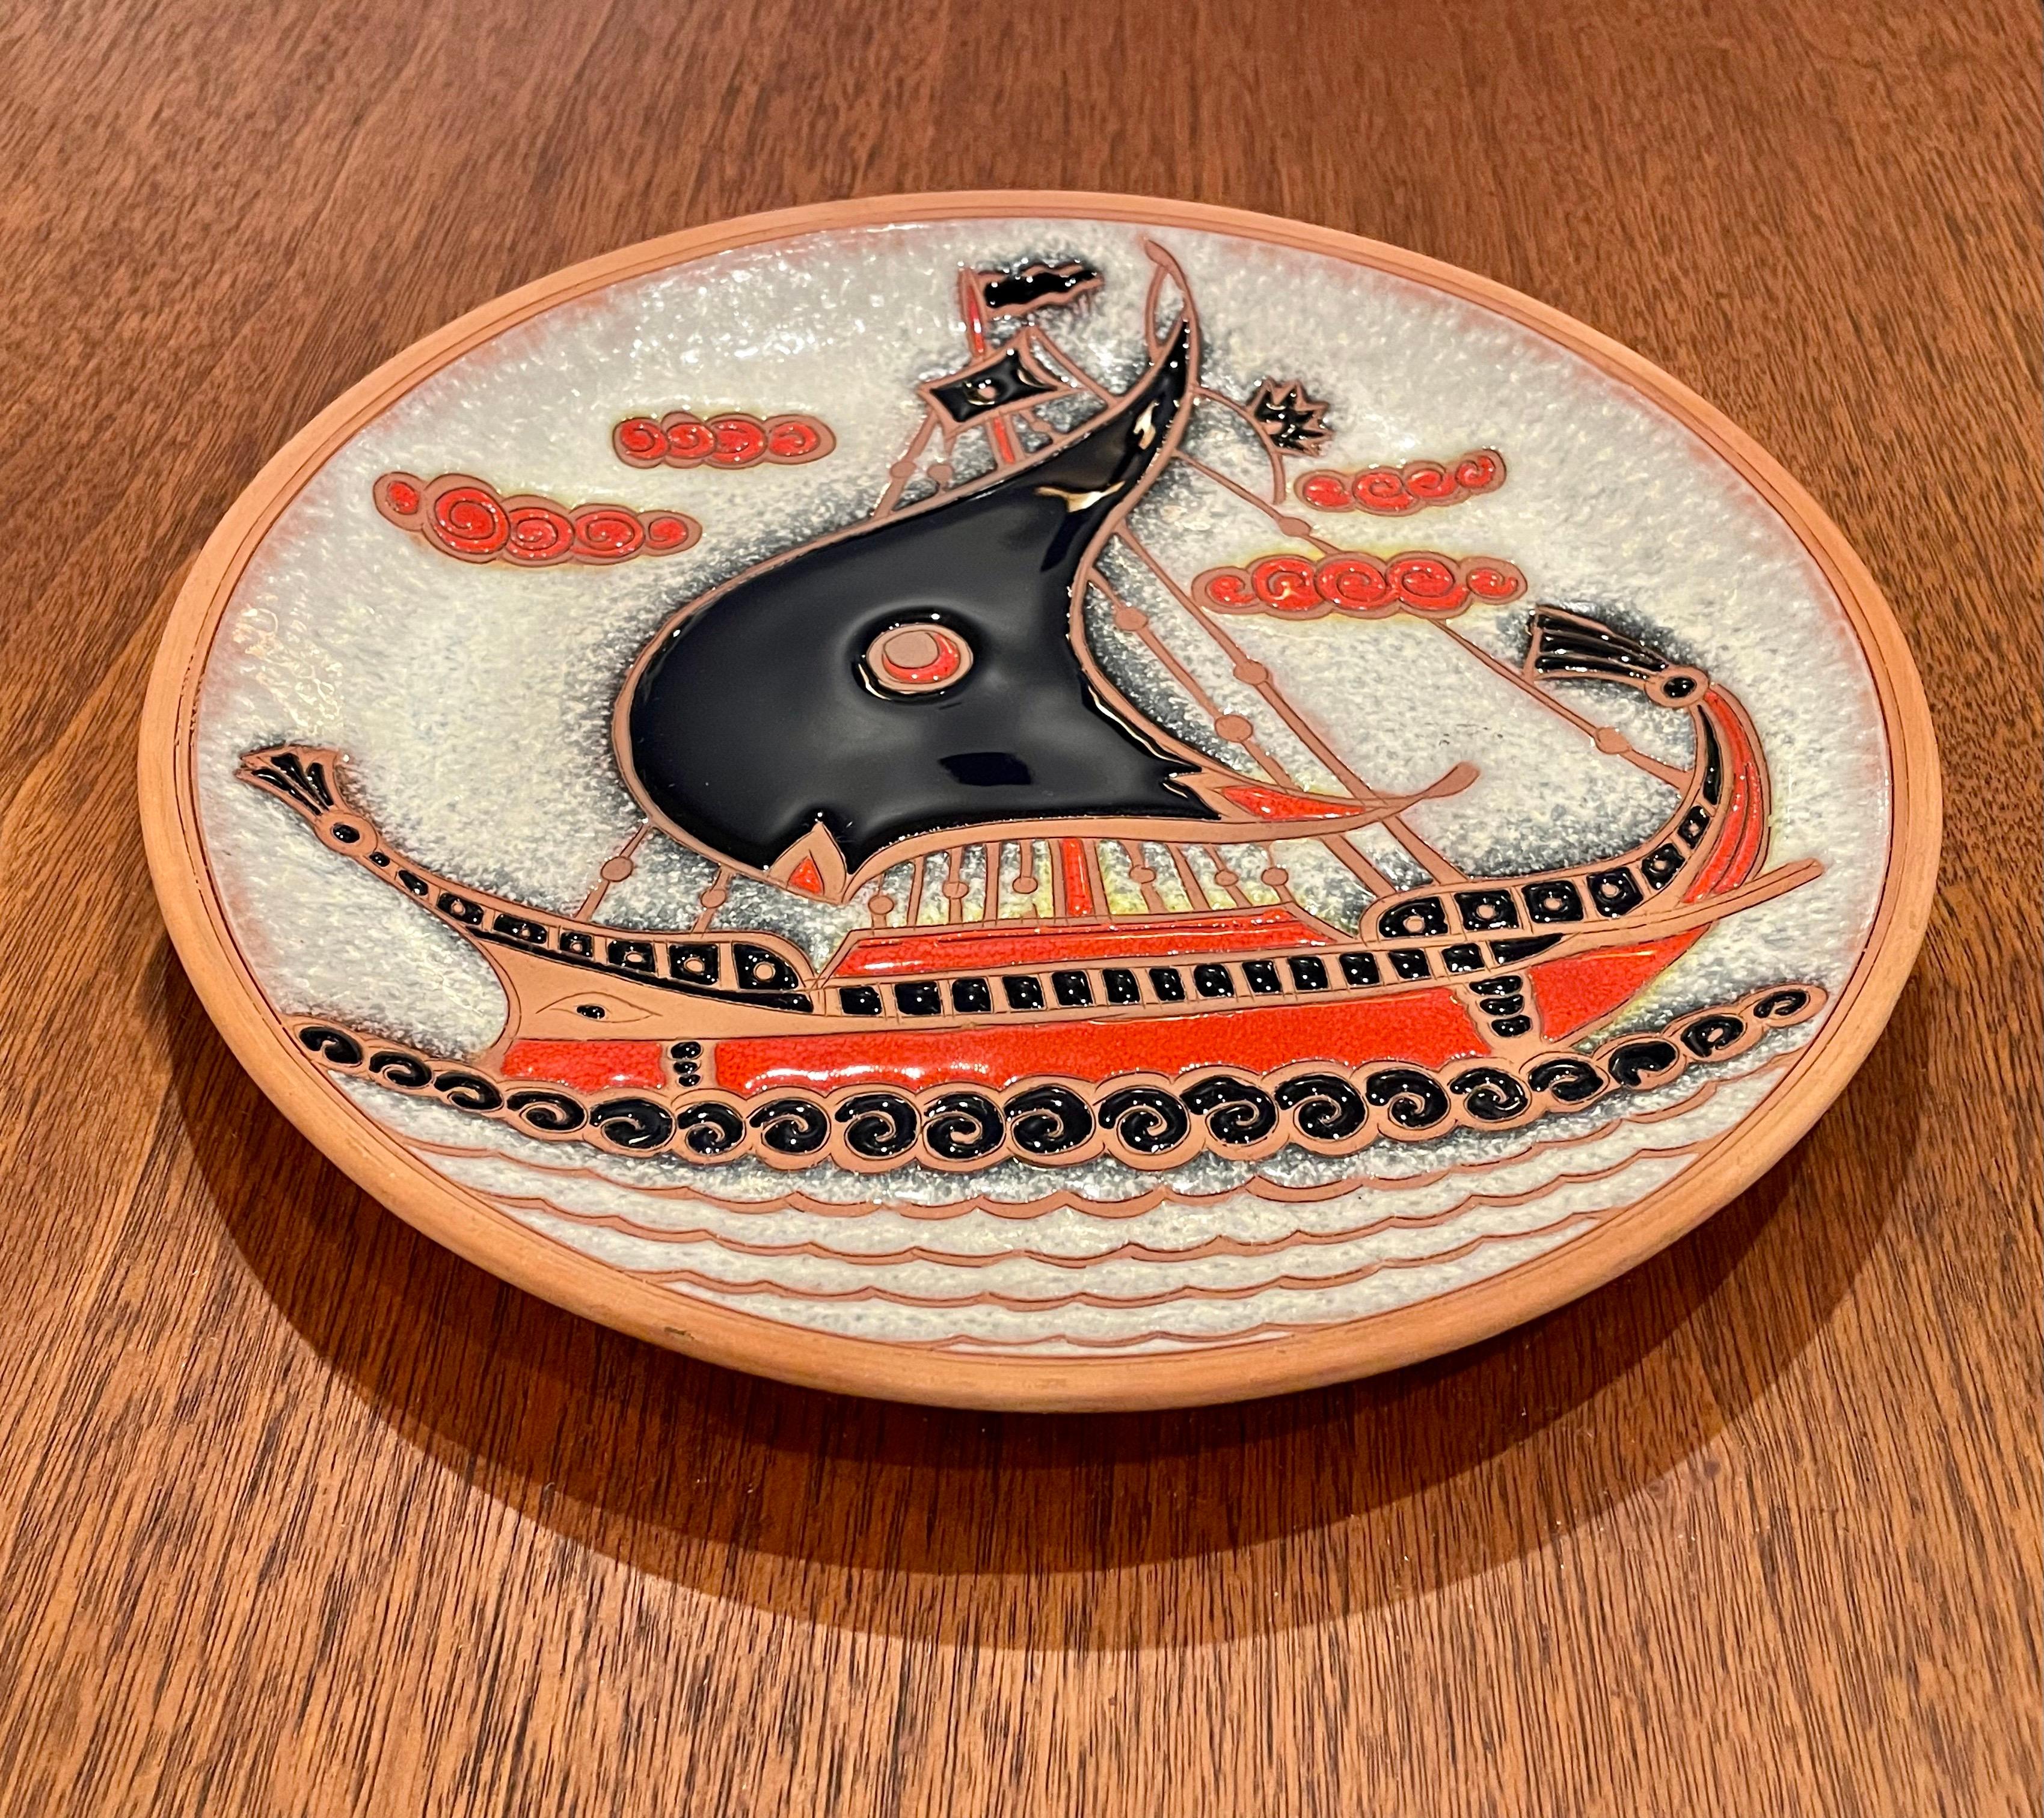 Decorative Hand Painted Ceramic Viking Ship Plate Circa 1970's In Excellent Condition For Sale In San Diego, CA